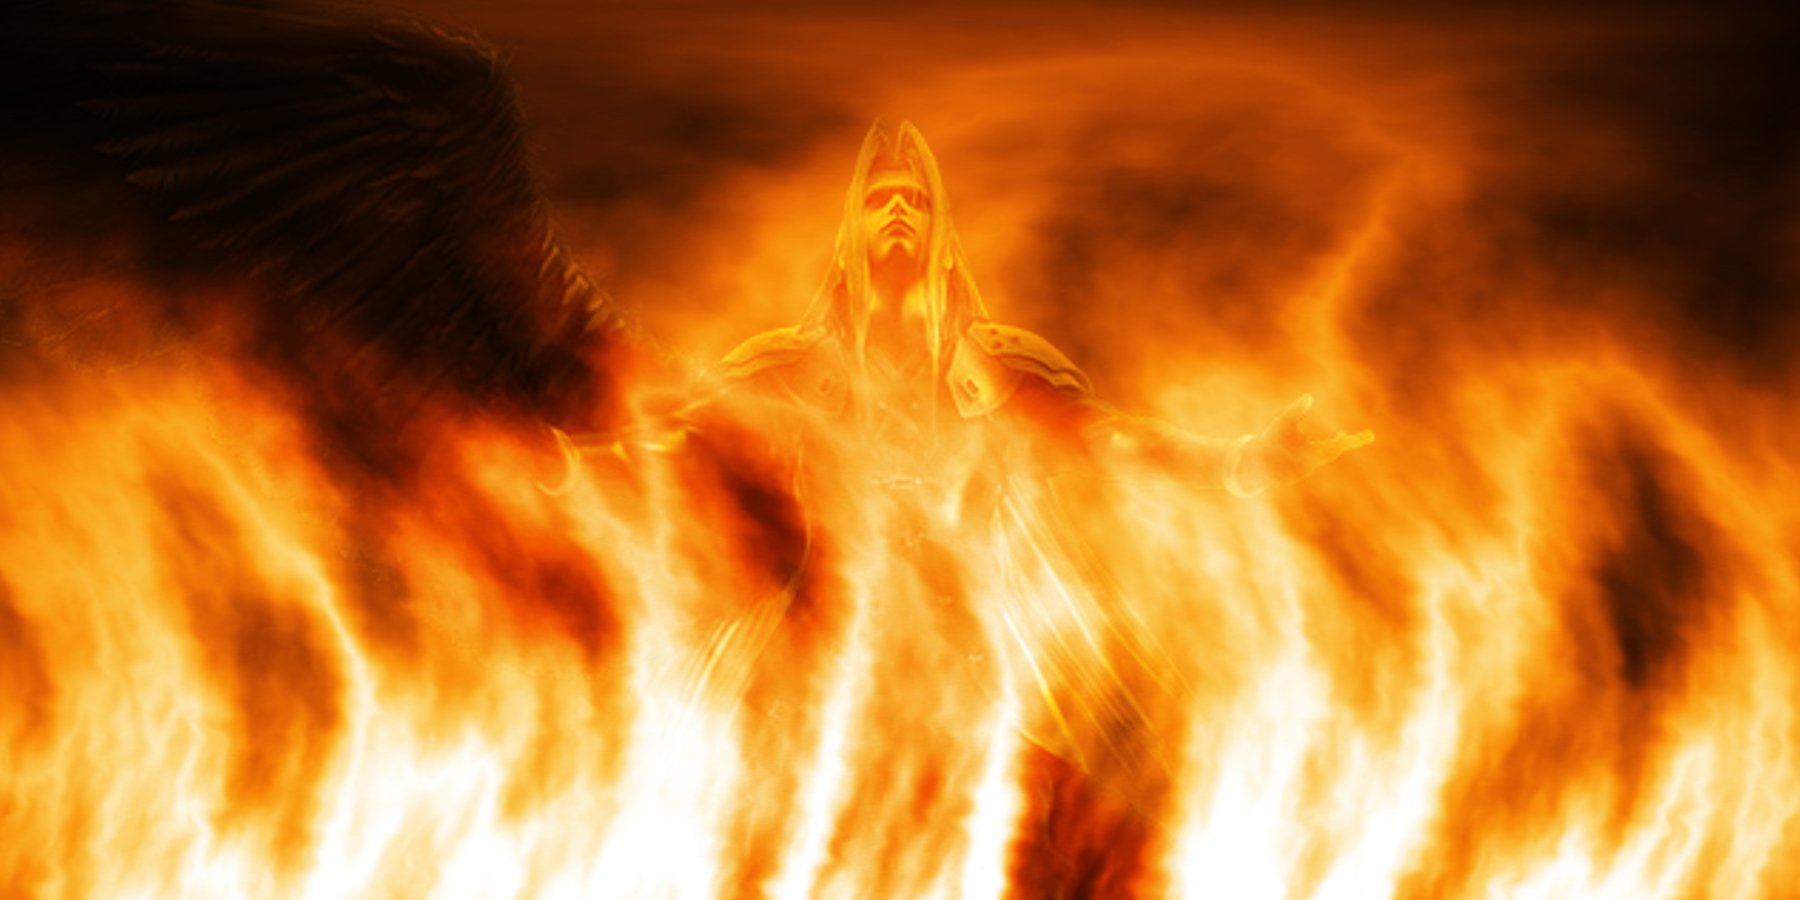 Epiphany: Sephiroth from Final Fantasy engulfed in fiery aura.